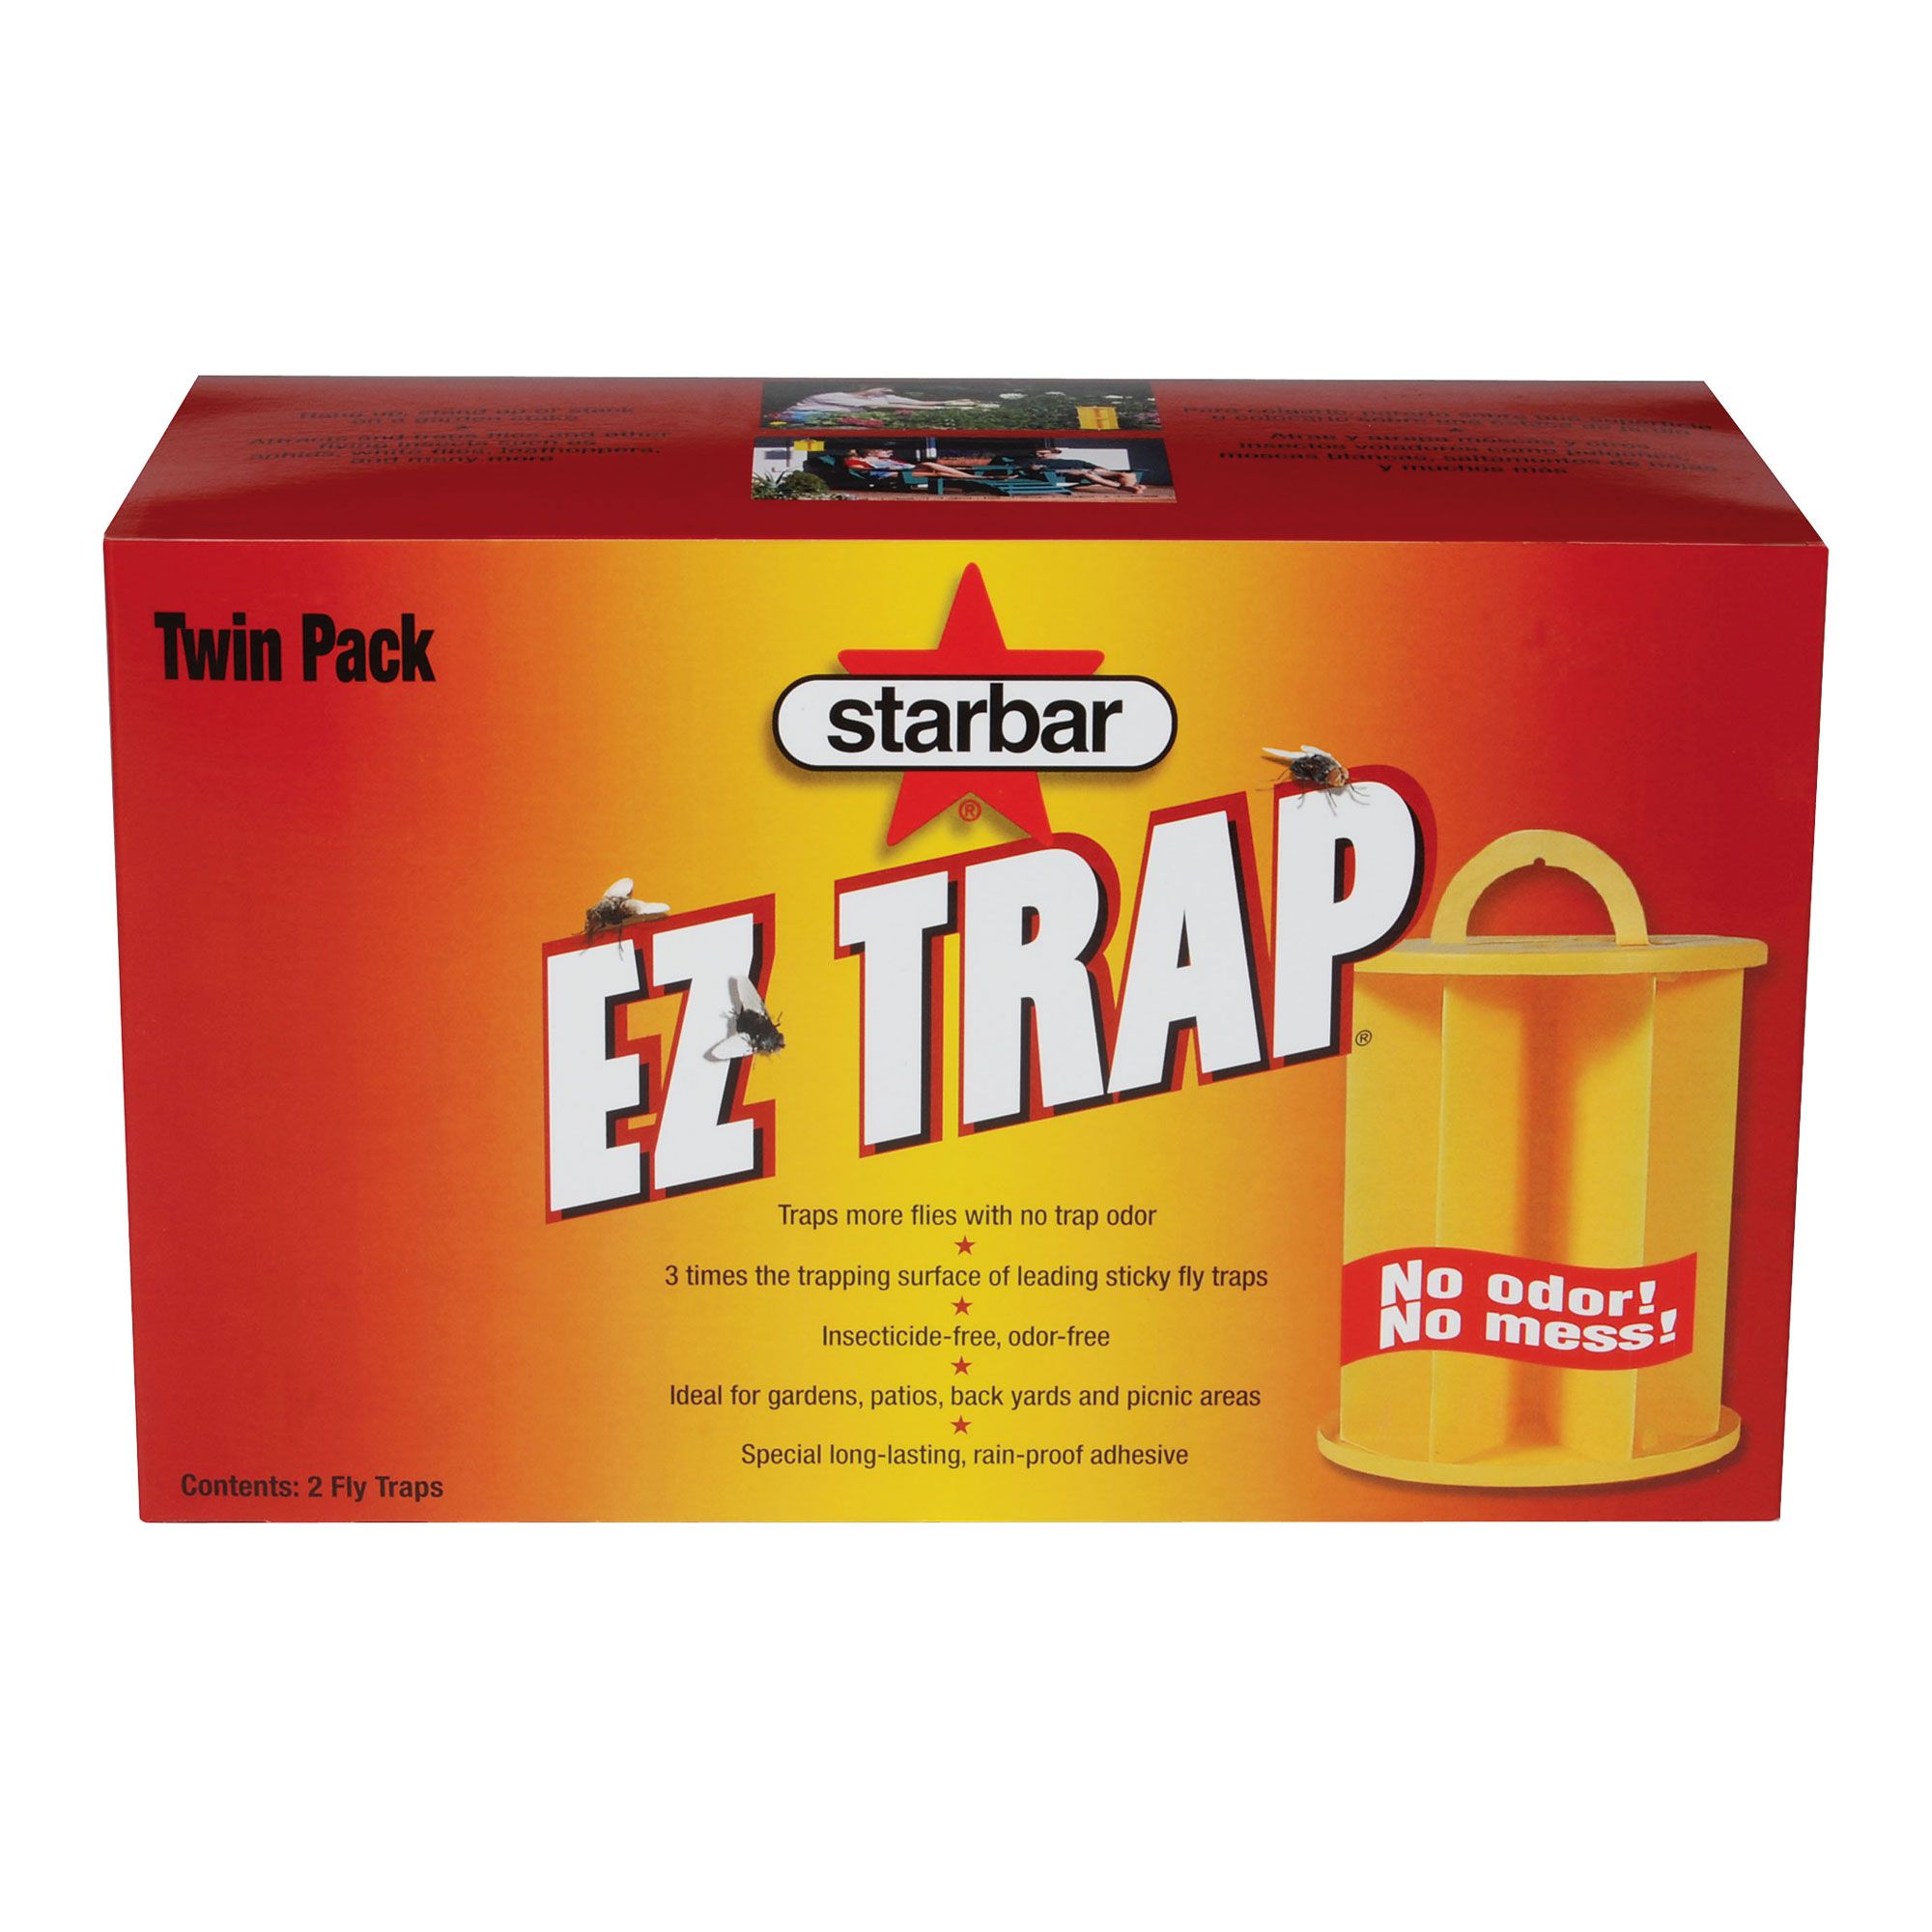 Starbar Bite Fly Stble Trap for sale online 